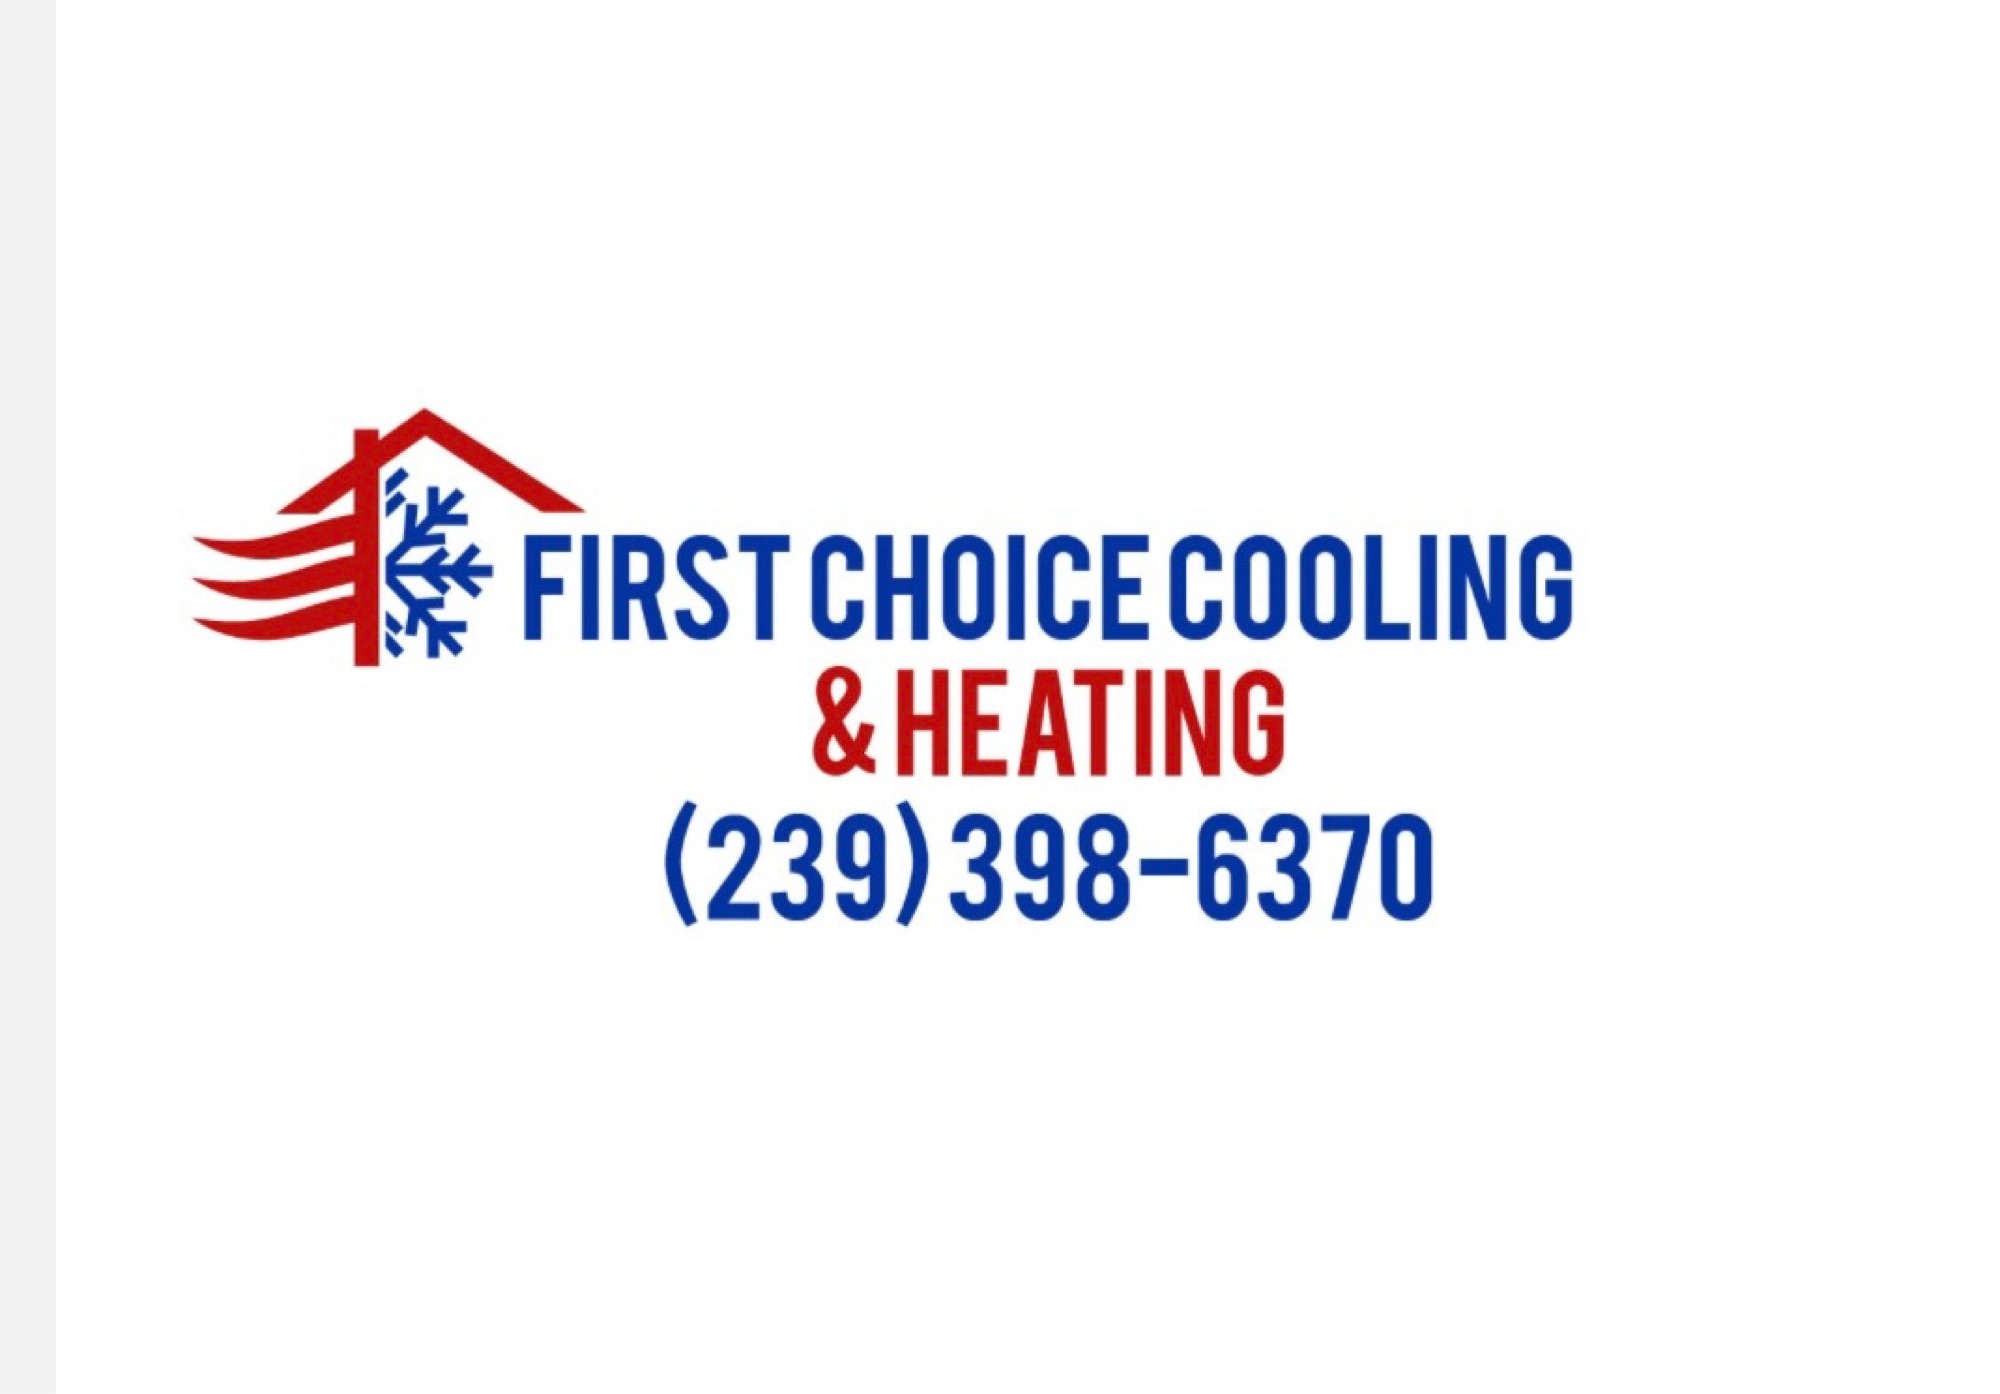 First Choice Cooling & Heating Logo